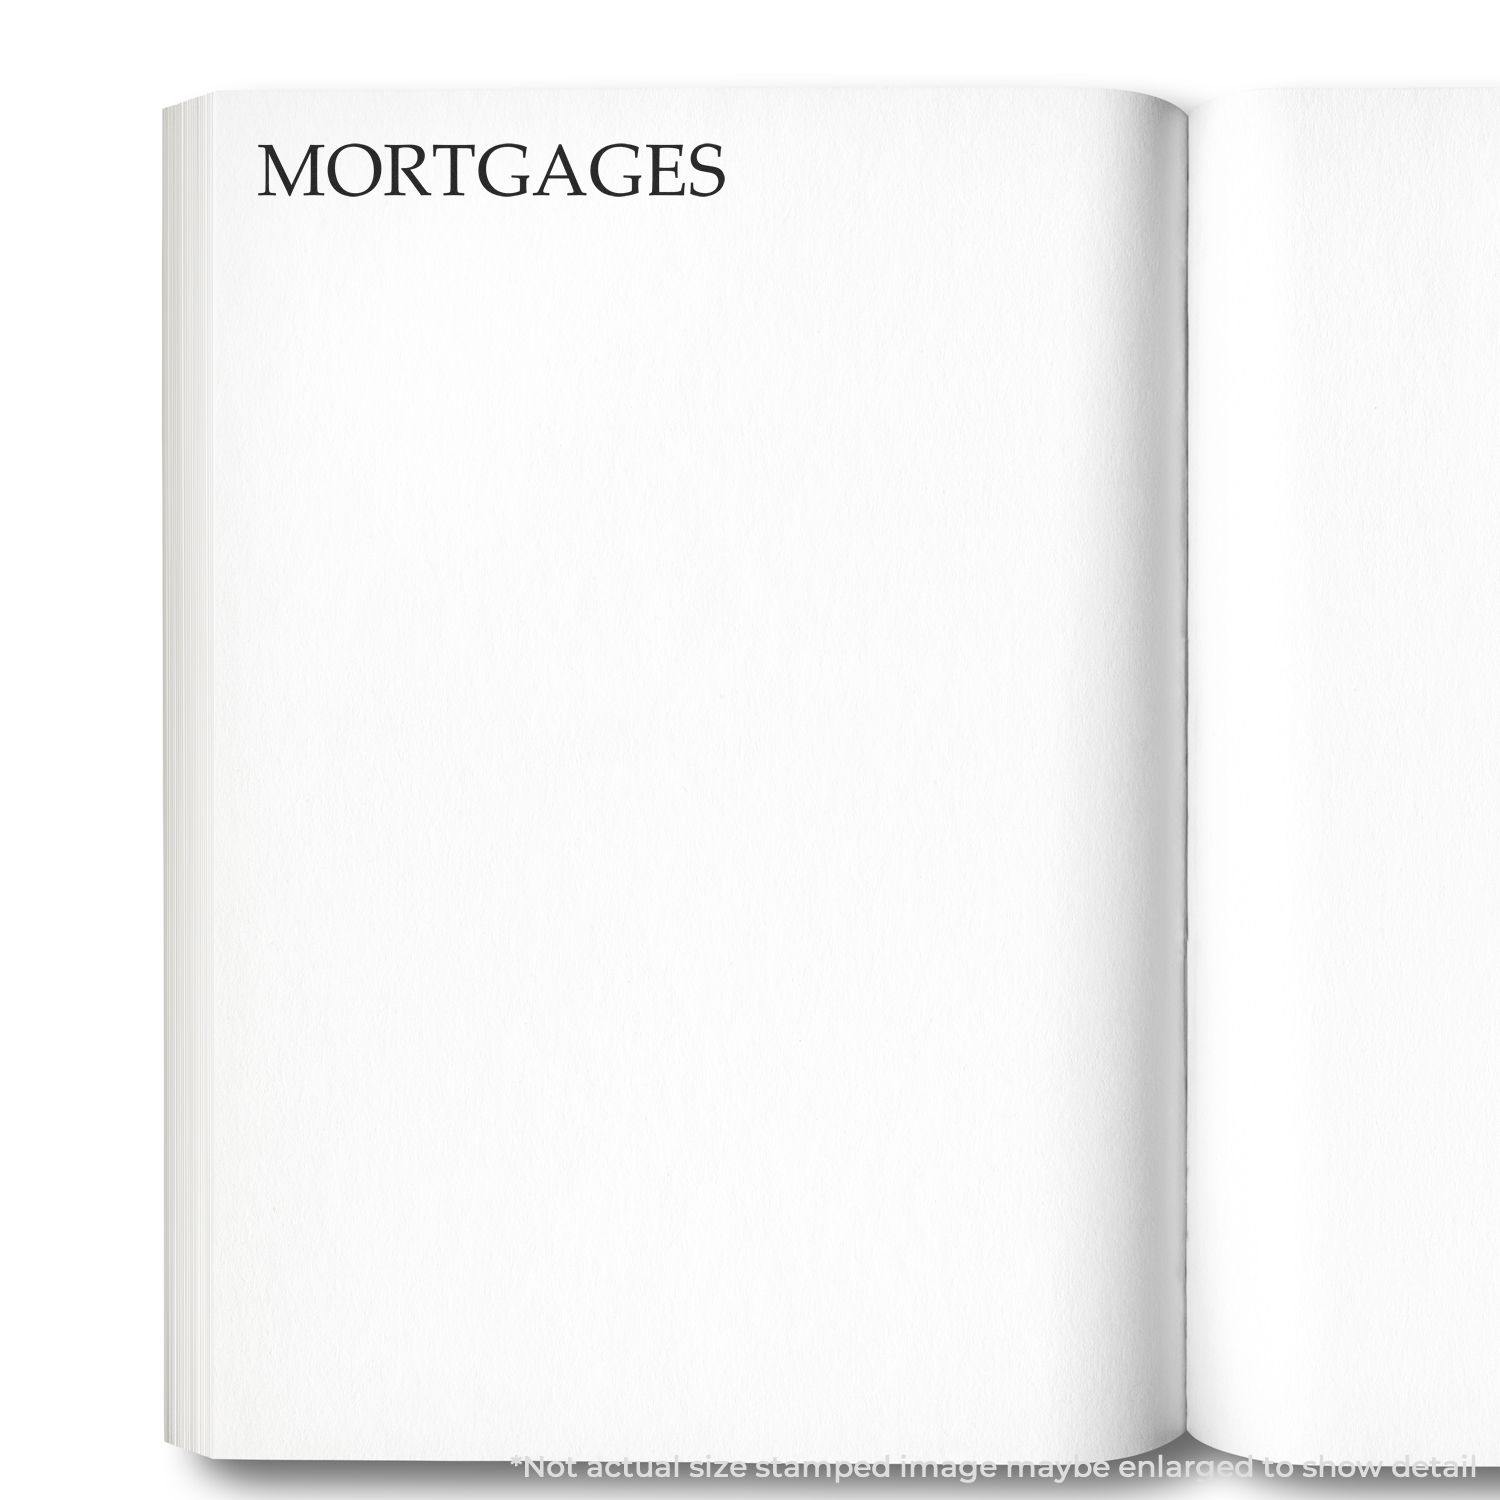 A stock office rubber stamp with a stamped image showing how the text "MORTGAGES" in a large font is displayed after stamping.